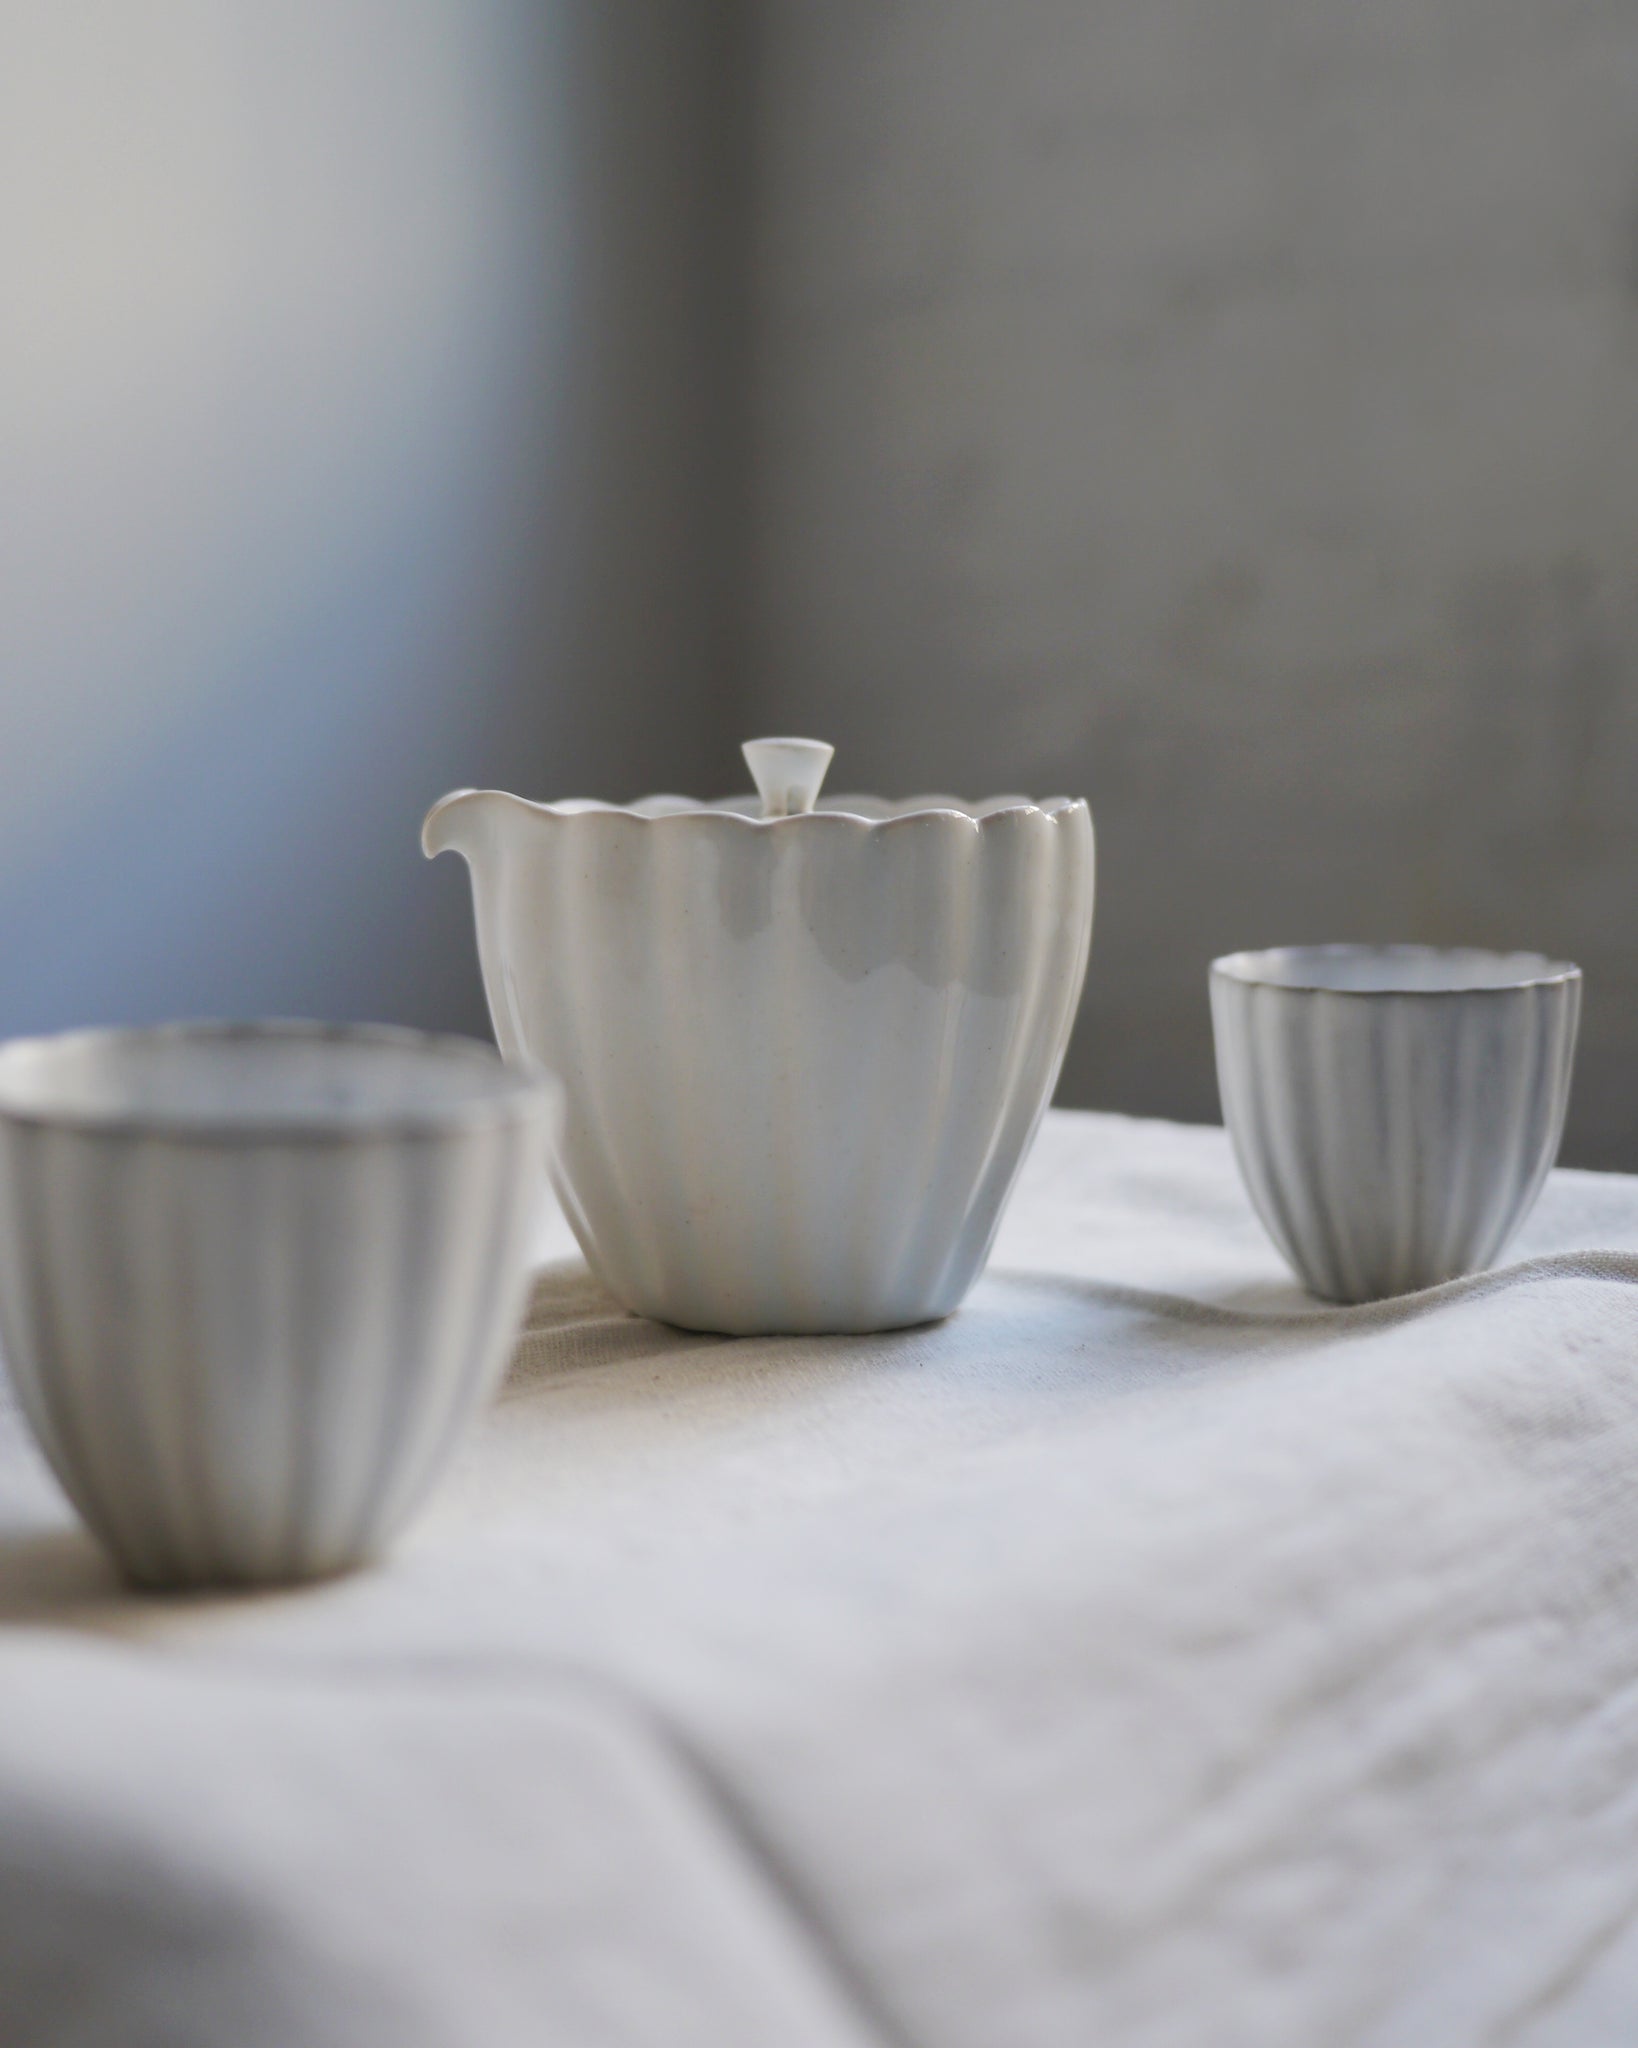 Shot of chrysanthemum teapot and teacups by Masanobu Ando on off white linen